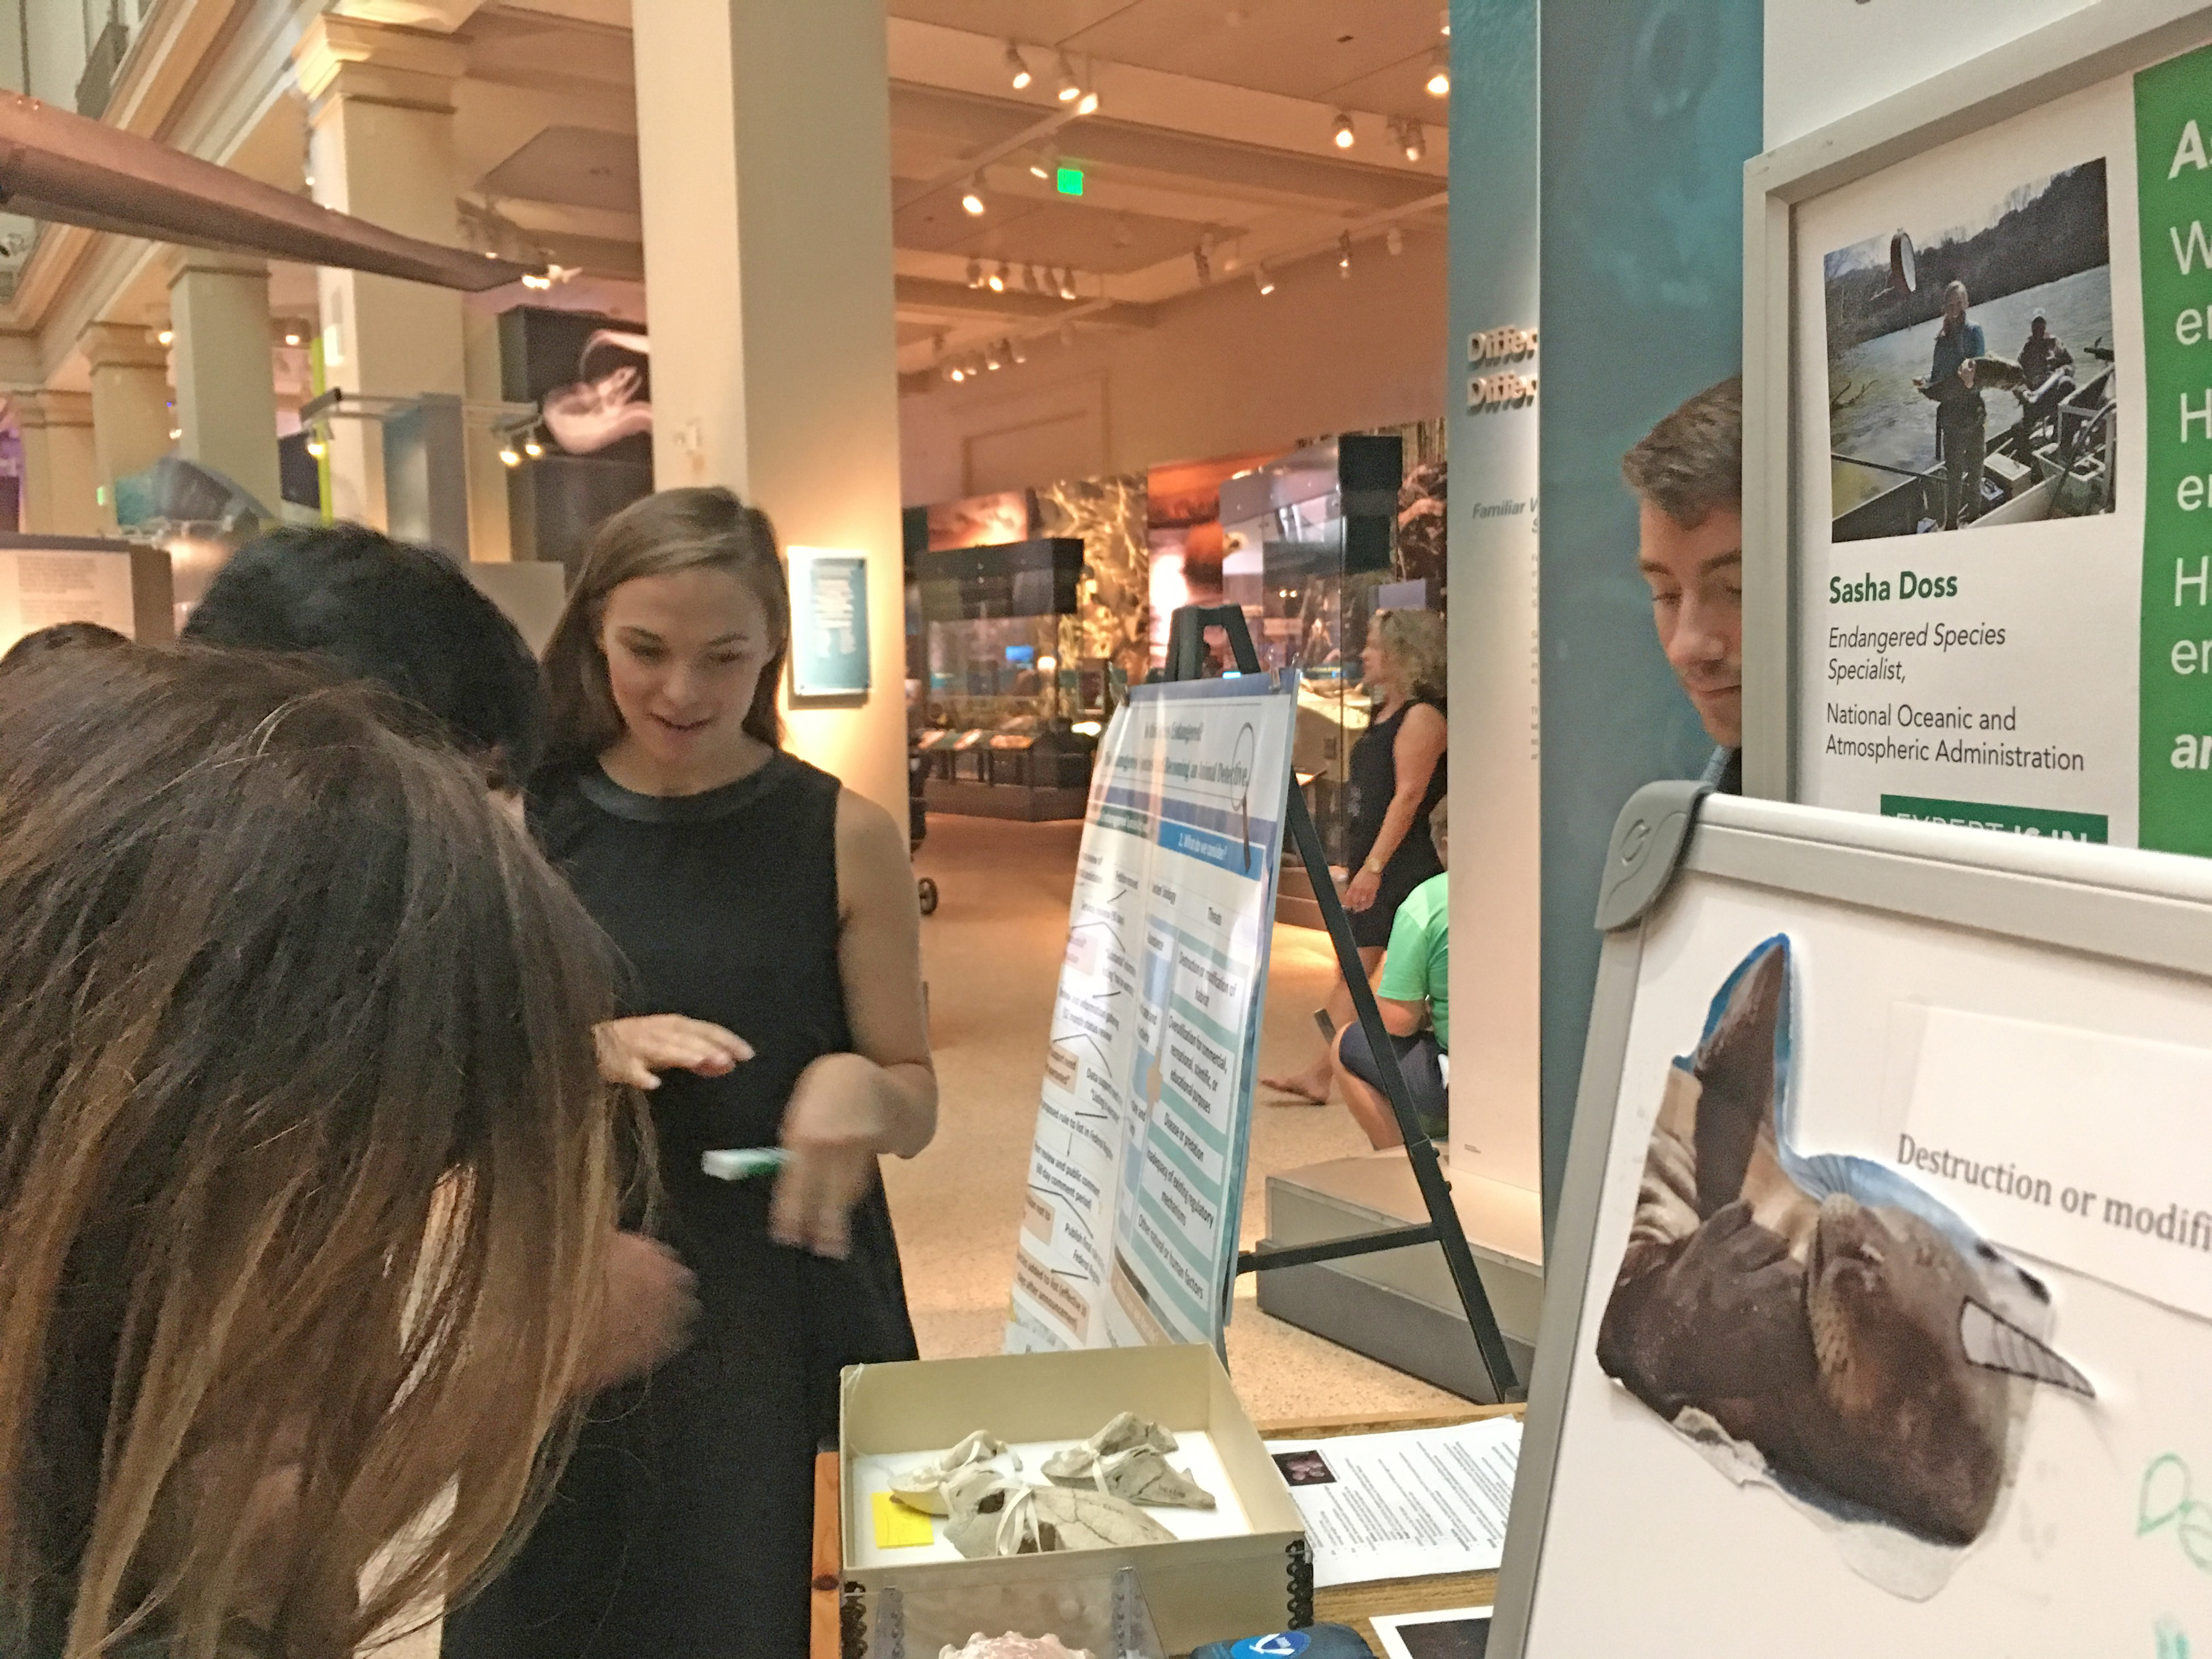 Sasha Doss (2017 Knauss Fellow with NOAA Fisheries) plays an educational game about endangered species with the museum visitors for the Expert Is In Kiosk at the Smithsonian Museum of Natural History.